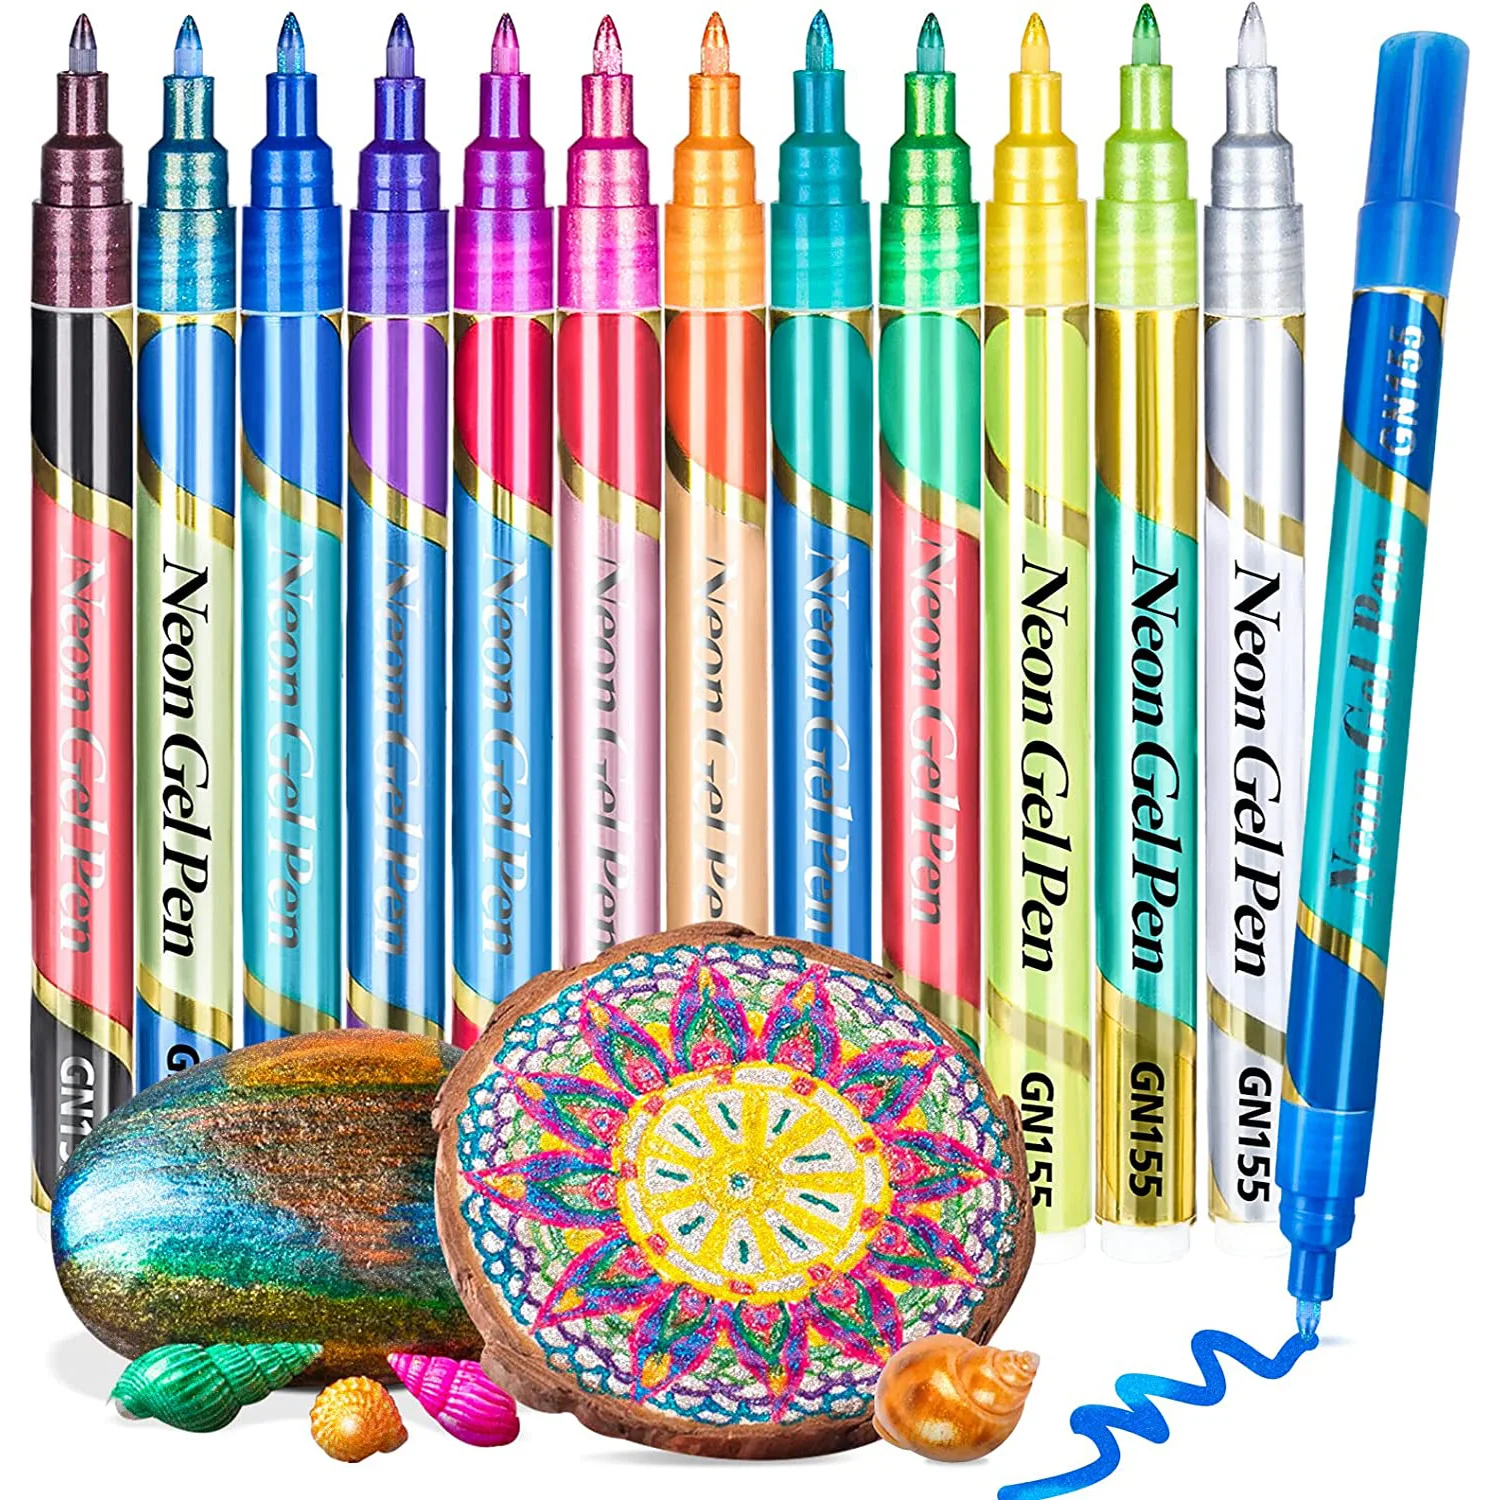 

Glitter Metallic Paint Marker Pens 12 Glitter Color Markers for Kids Water-Based Sparkle Marker Pen with Fine Tip for Painting